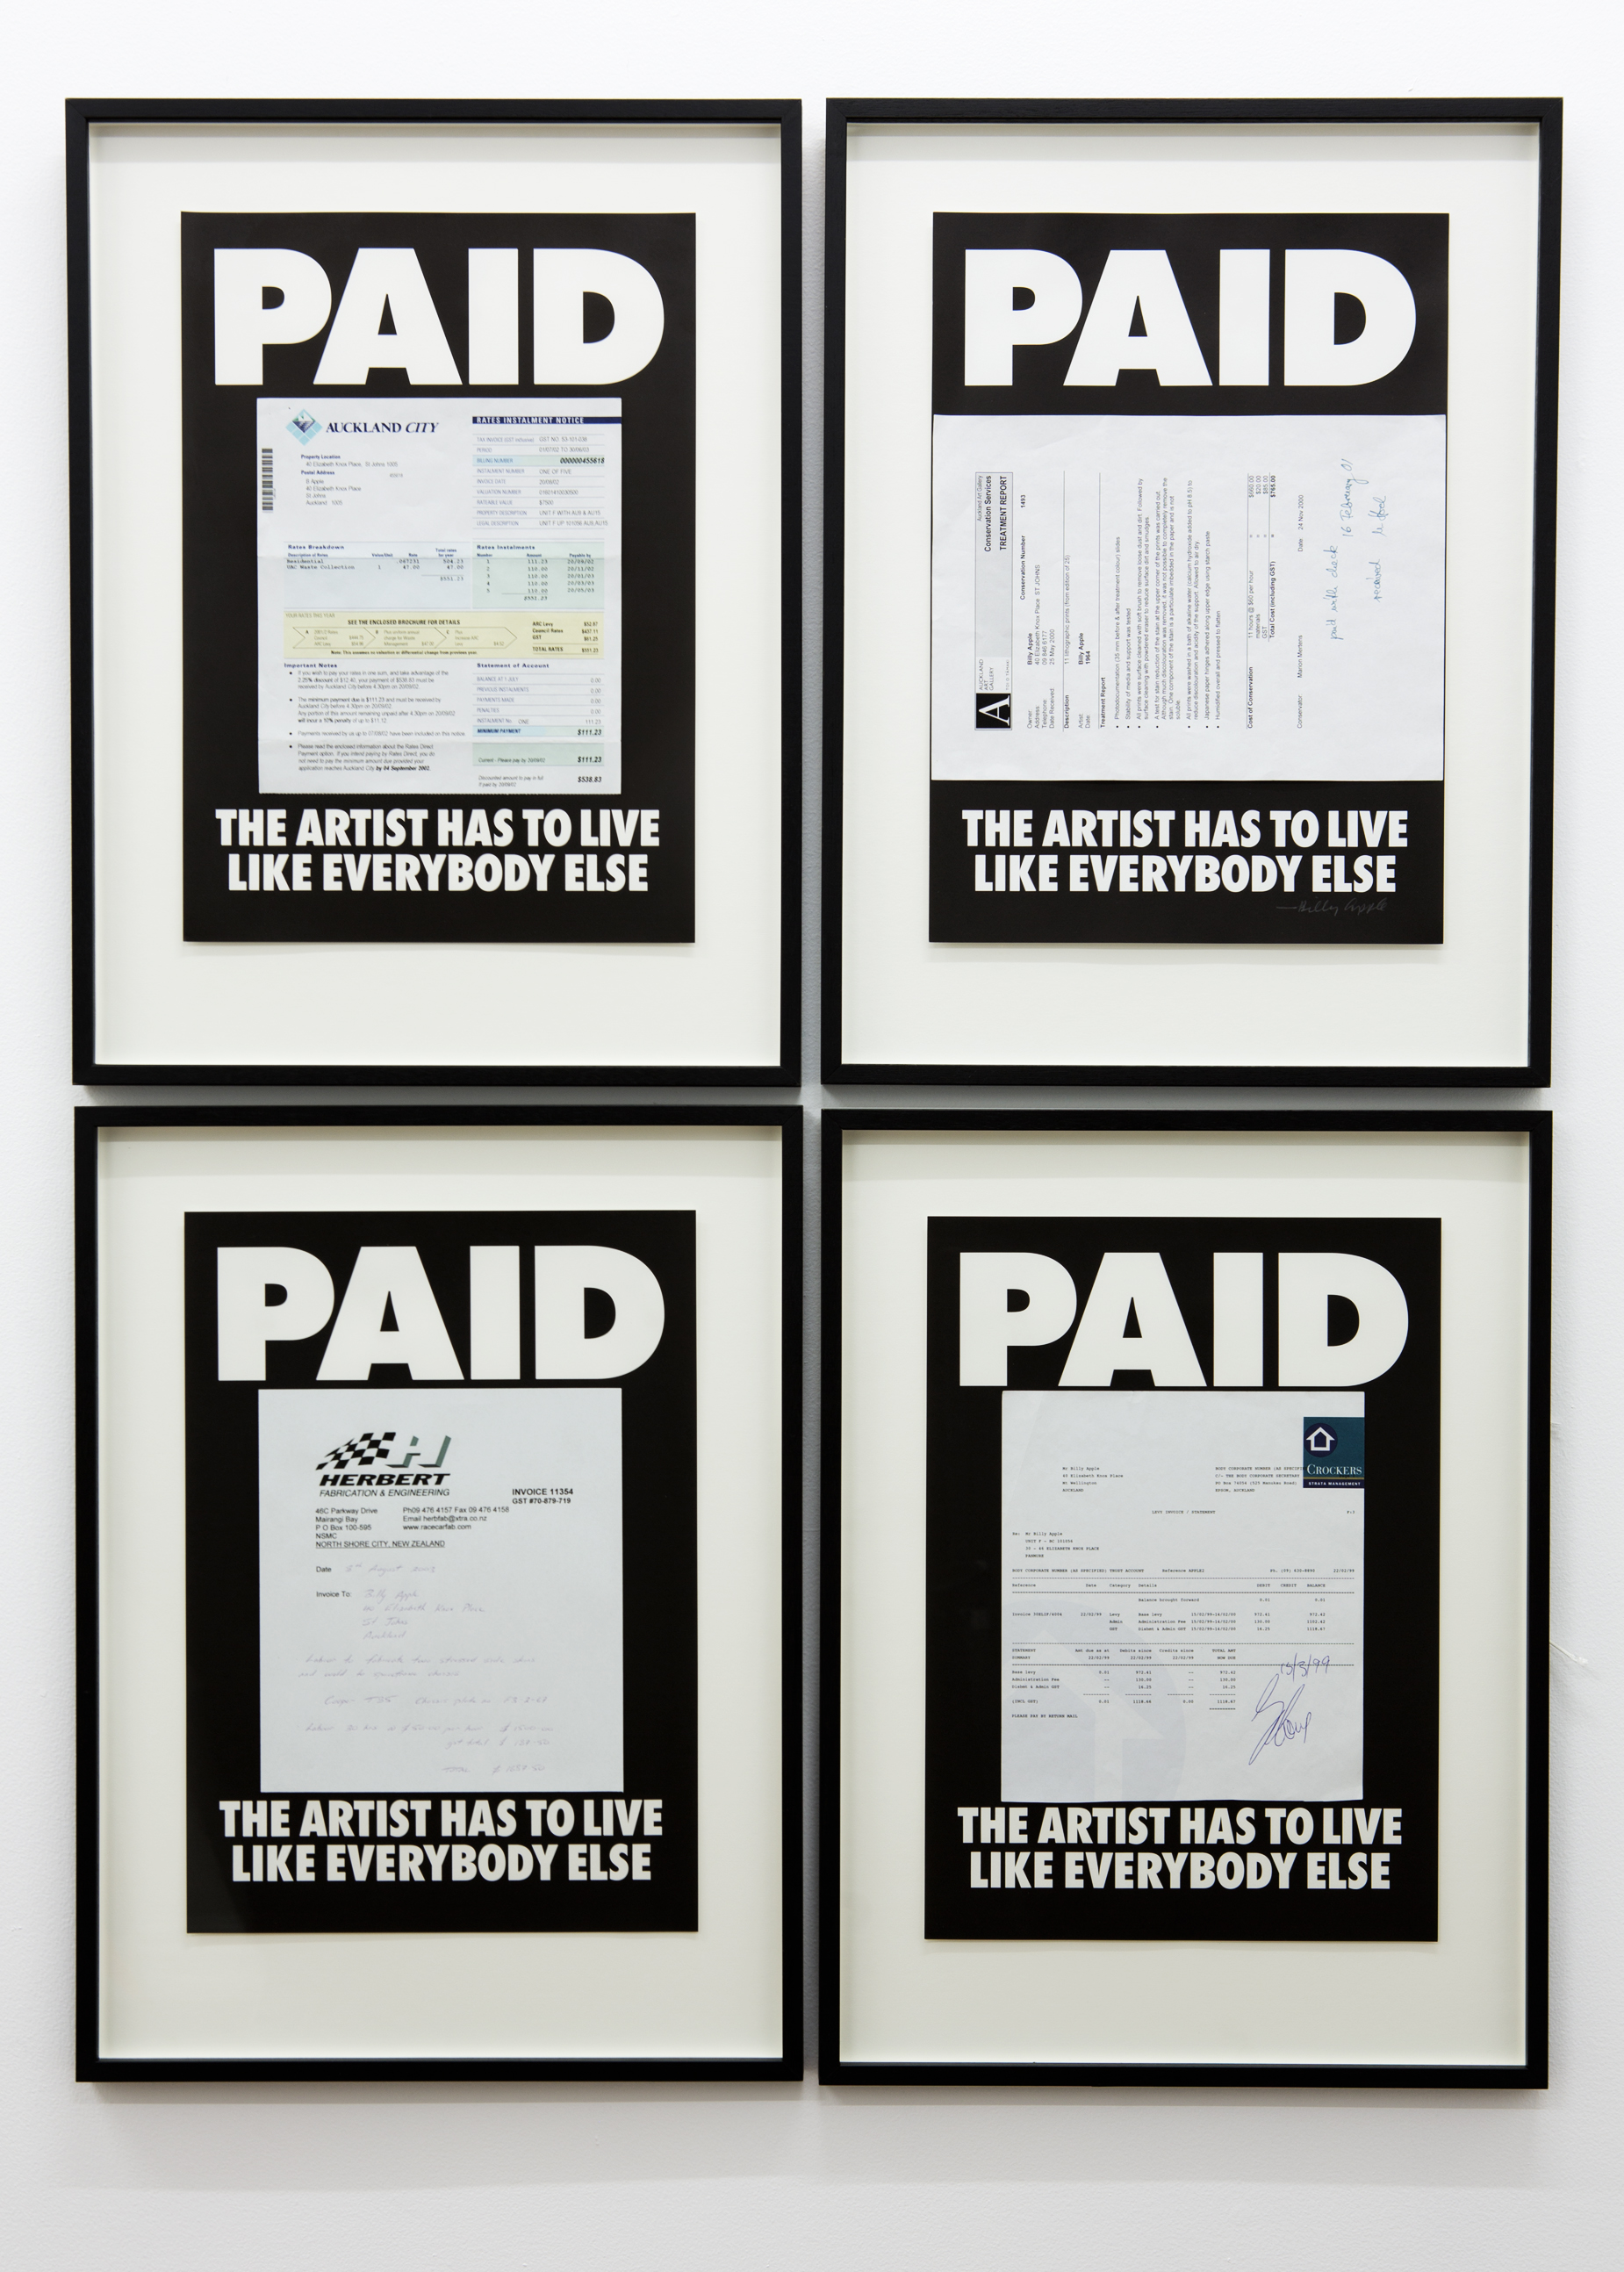 Paid: The Artist Has to Live Like Everybody Else